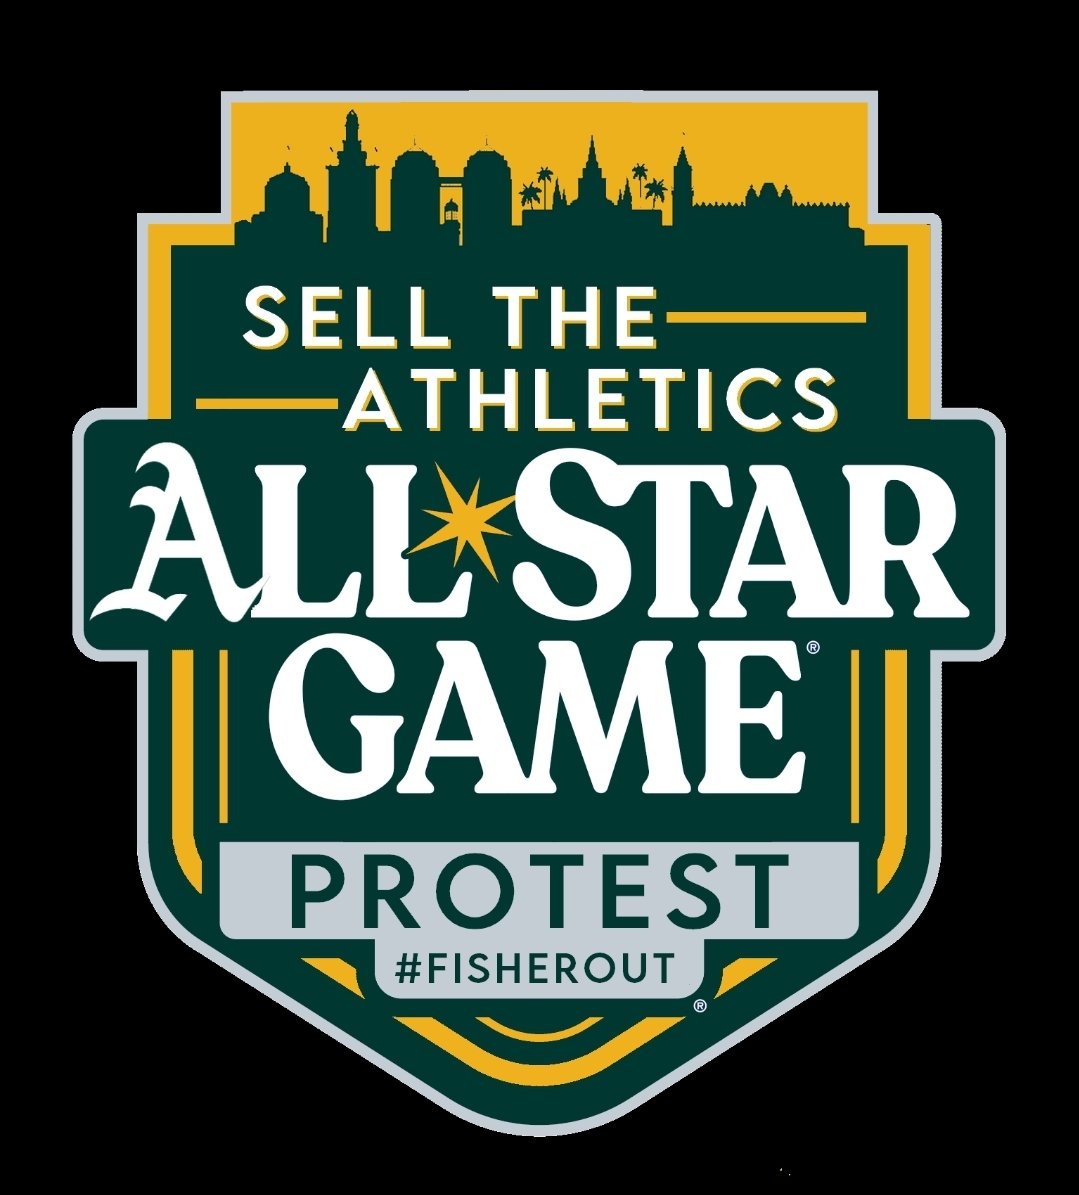 @darrinopolis There is a plan to protest at the All Star Game in Seattle. Flights are already booked.... just need more  folks to join em #AllStarGame #FisherOut #OaklandForever